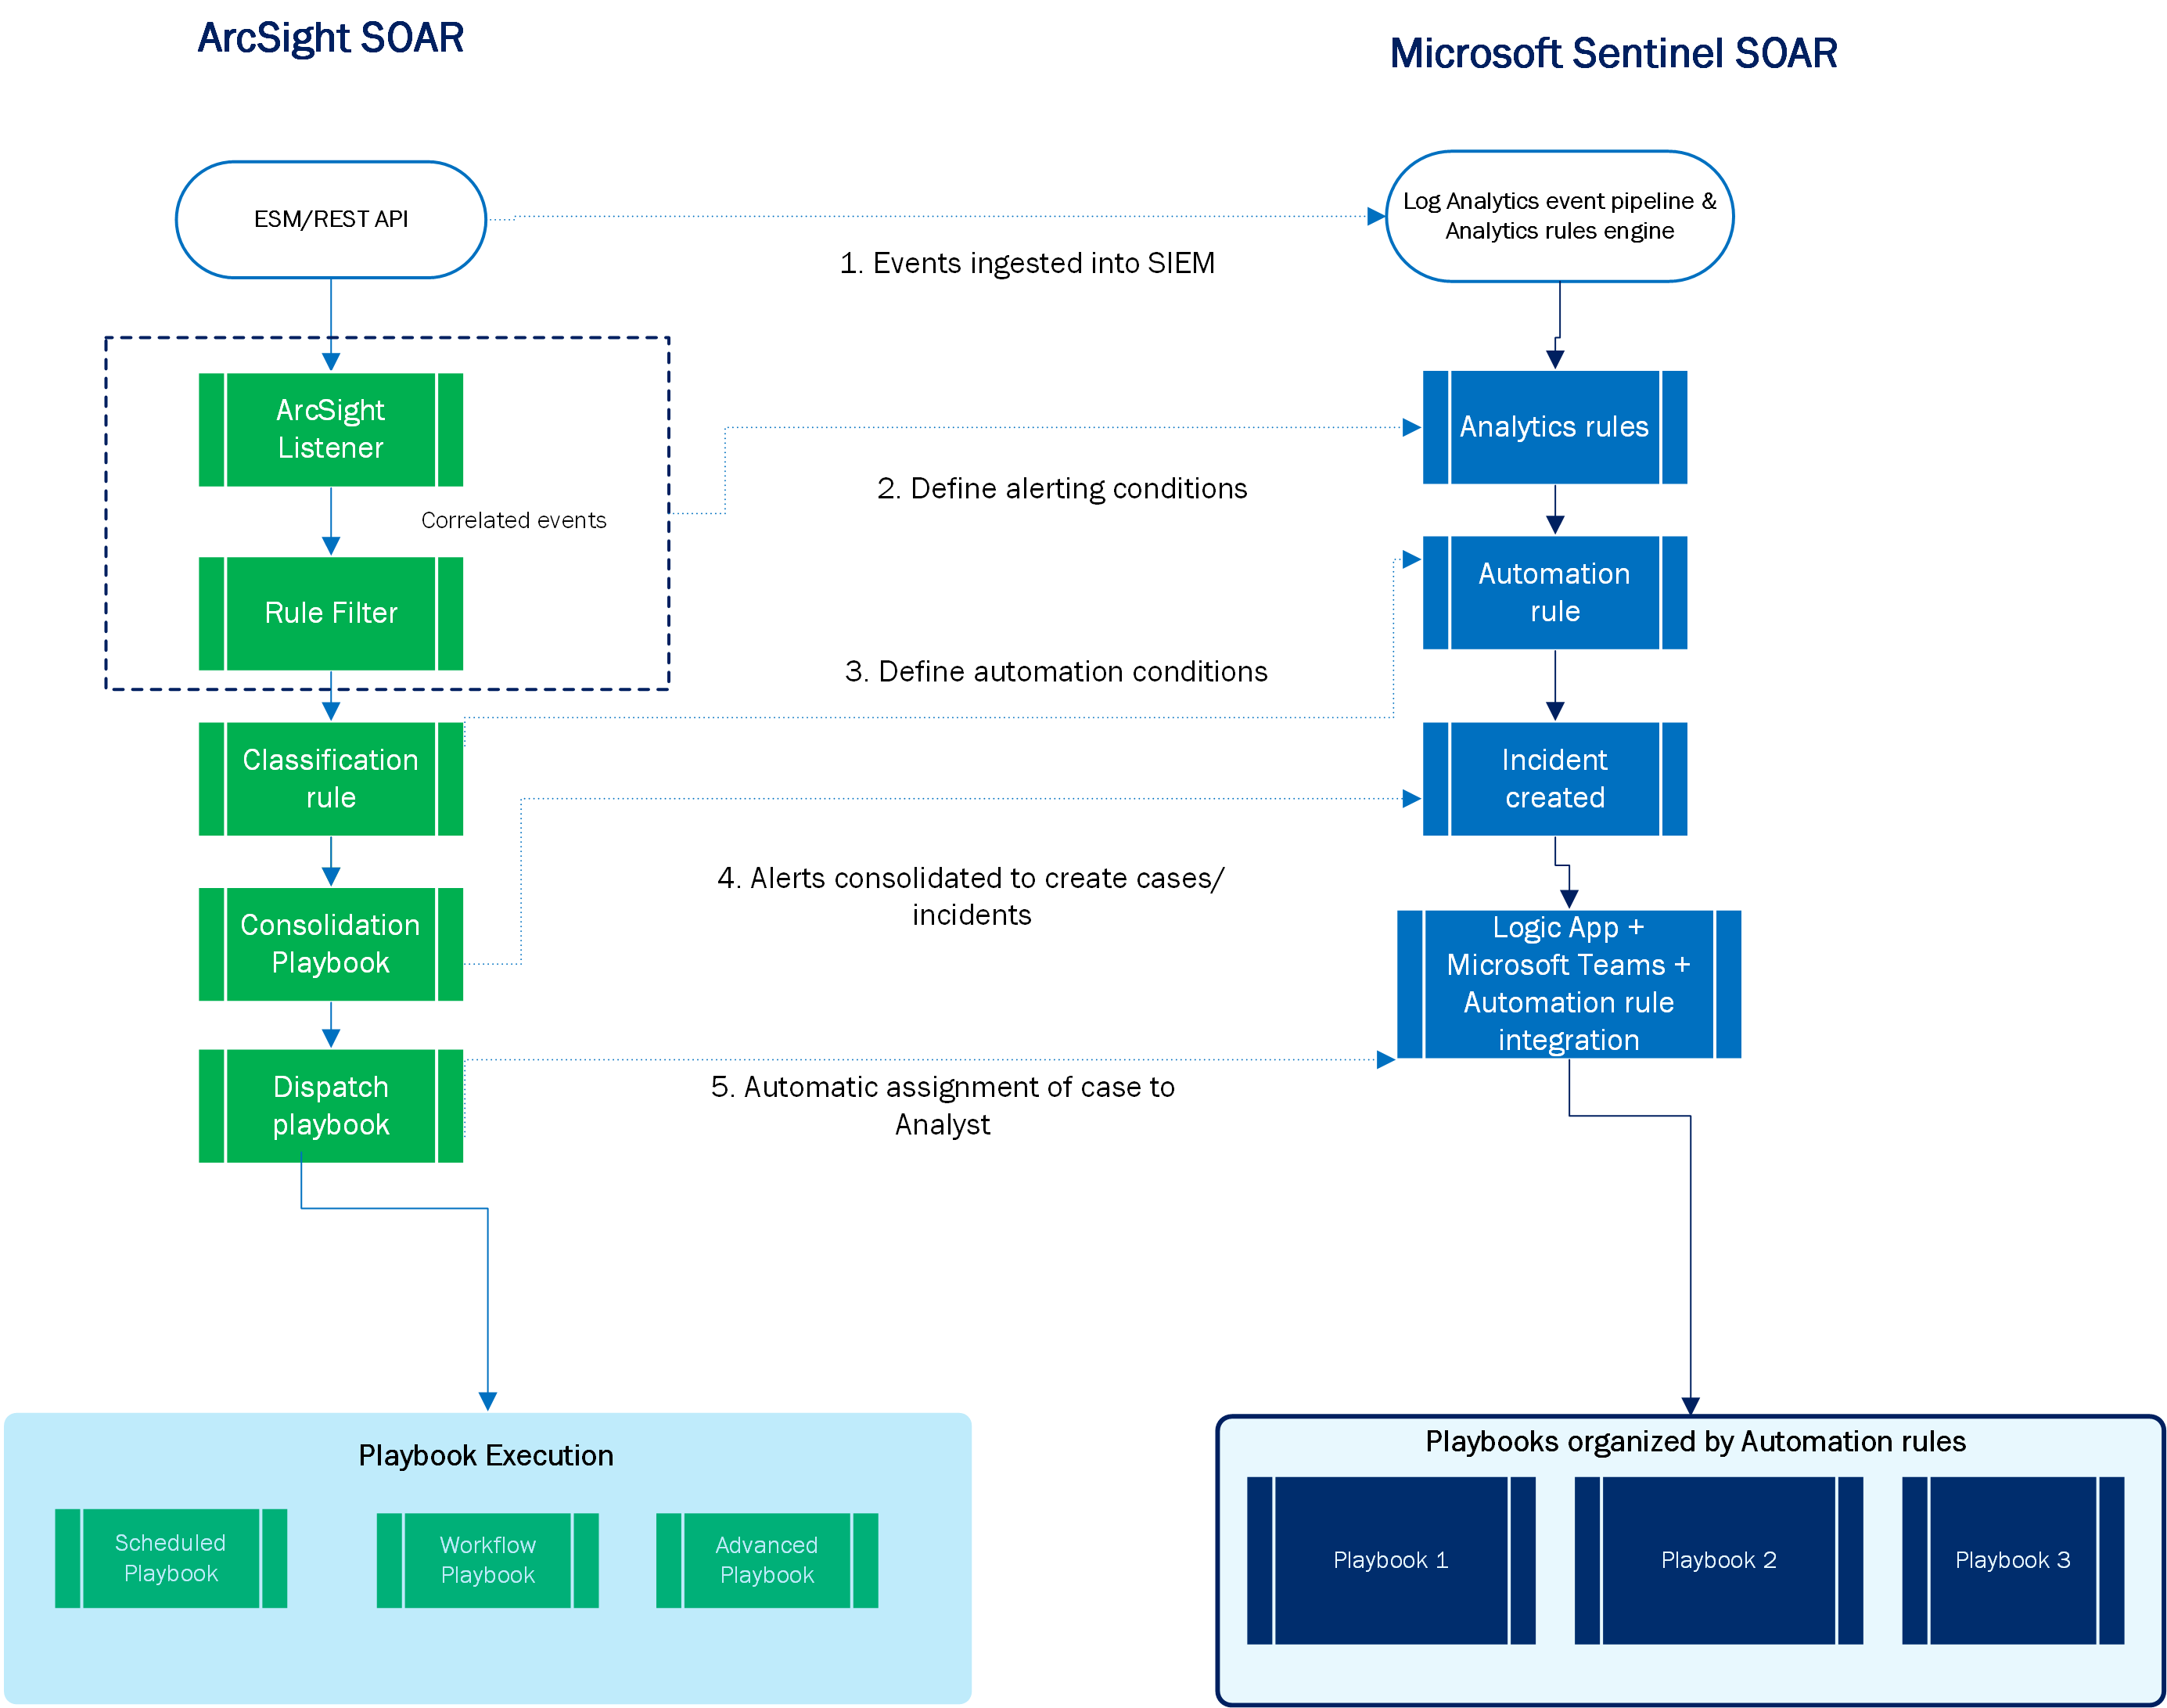 Diagram displaying the ArcSight and Microsoft Sentinel SOAR workflows.